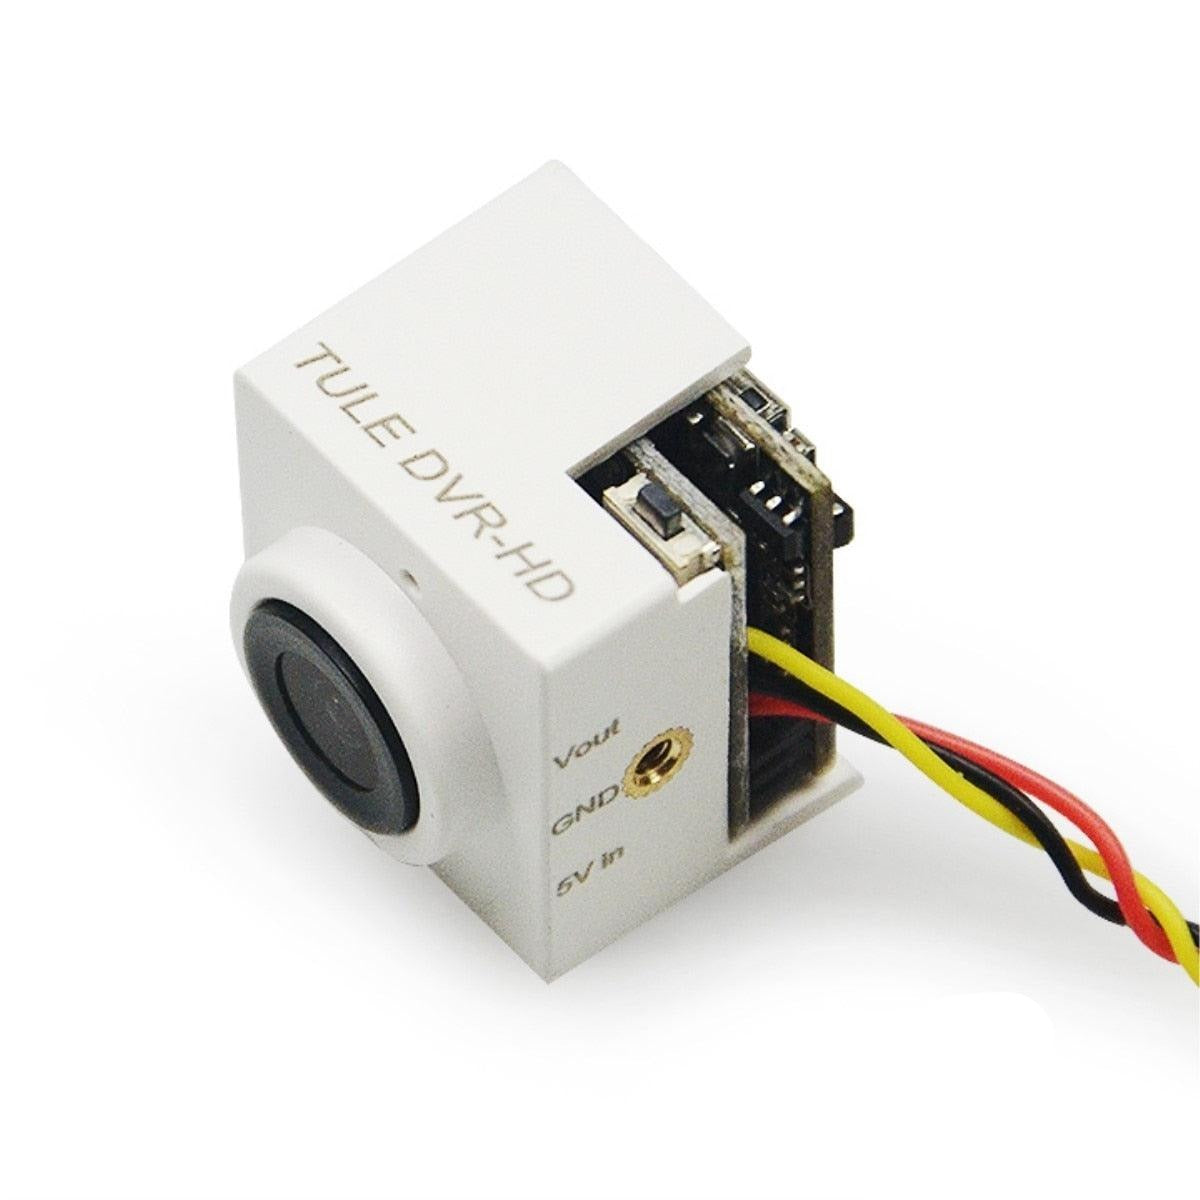 Only 7g TULE 720P 170 Wide Angle Micro Mini Camera with DVR function for Aerial Photography FPV Racing - RCDrone